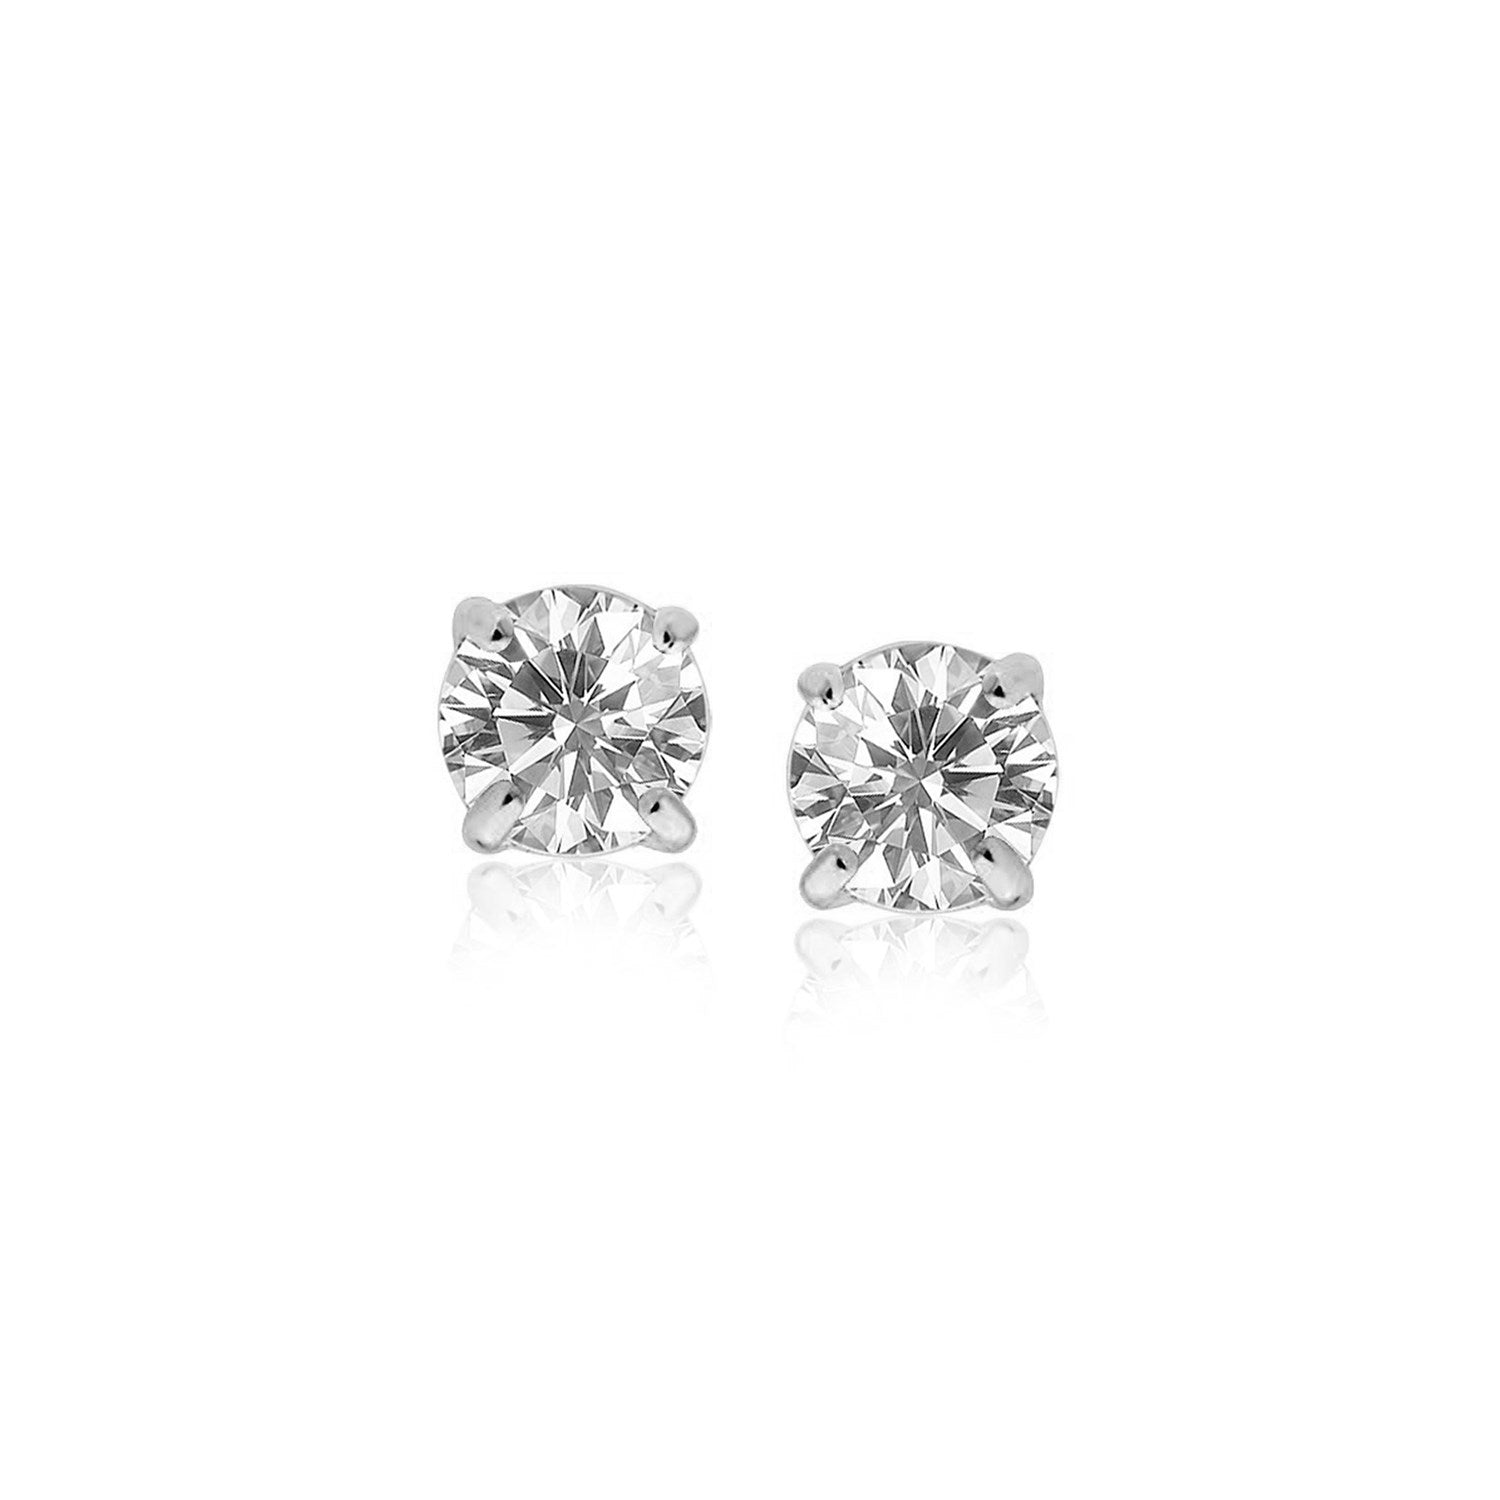 Women's Sterling Silver Stud Earrings Set of 2 Round 5MM/8MM Cubic Zirconia  2pc- A New Day™ Silver/Clear